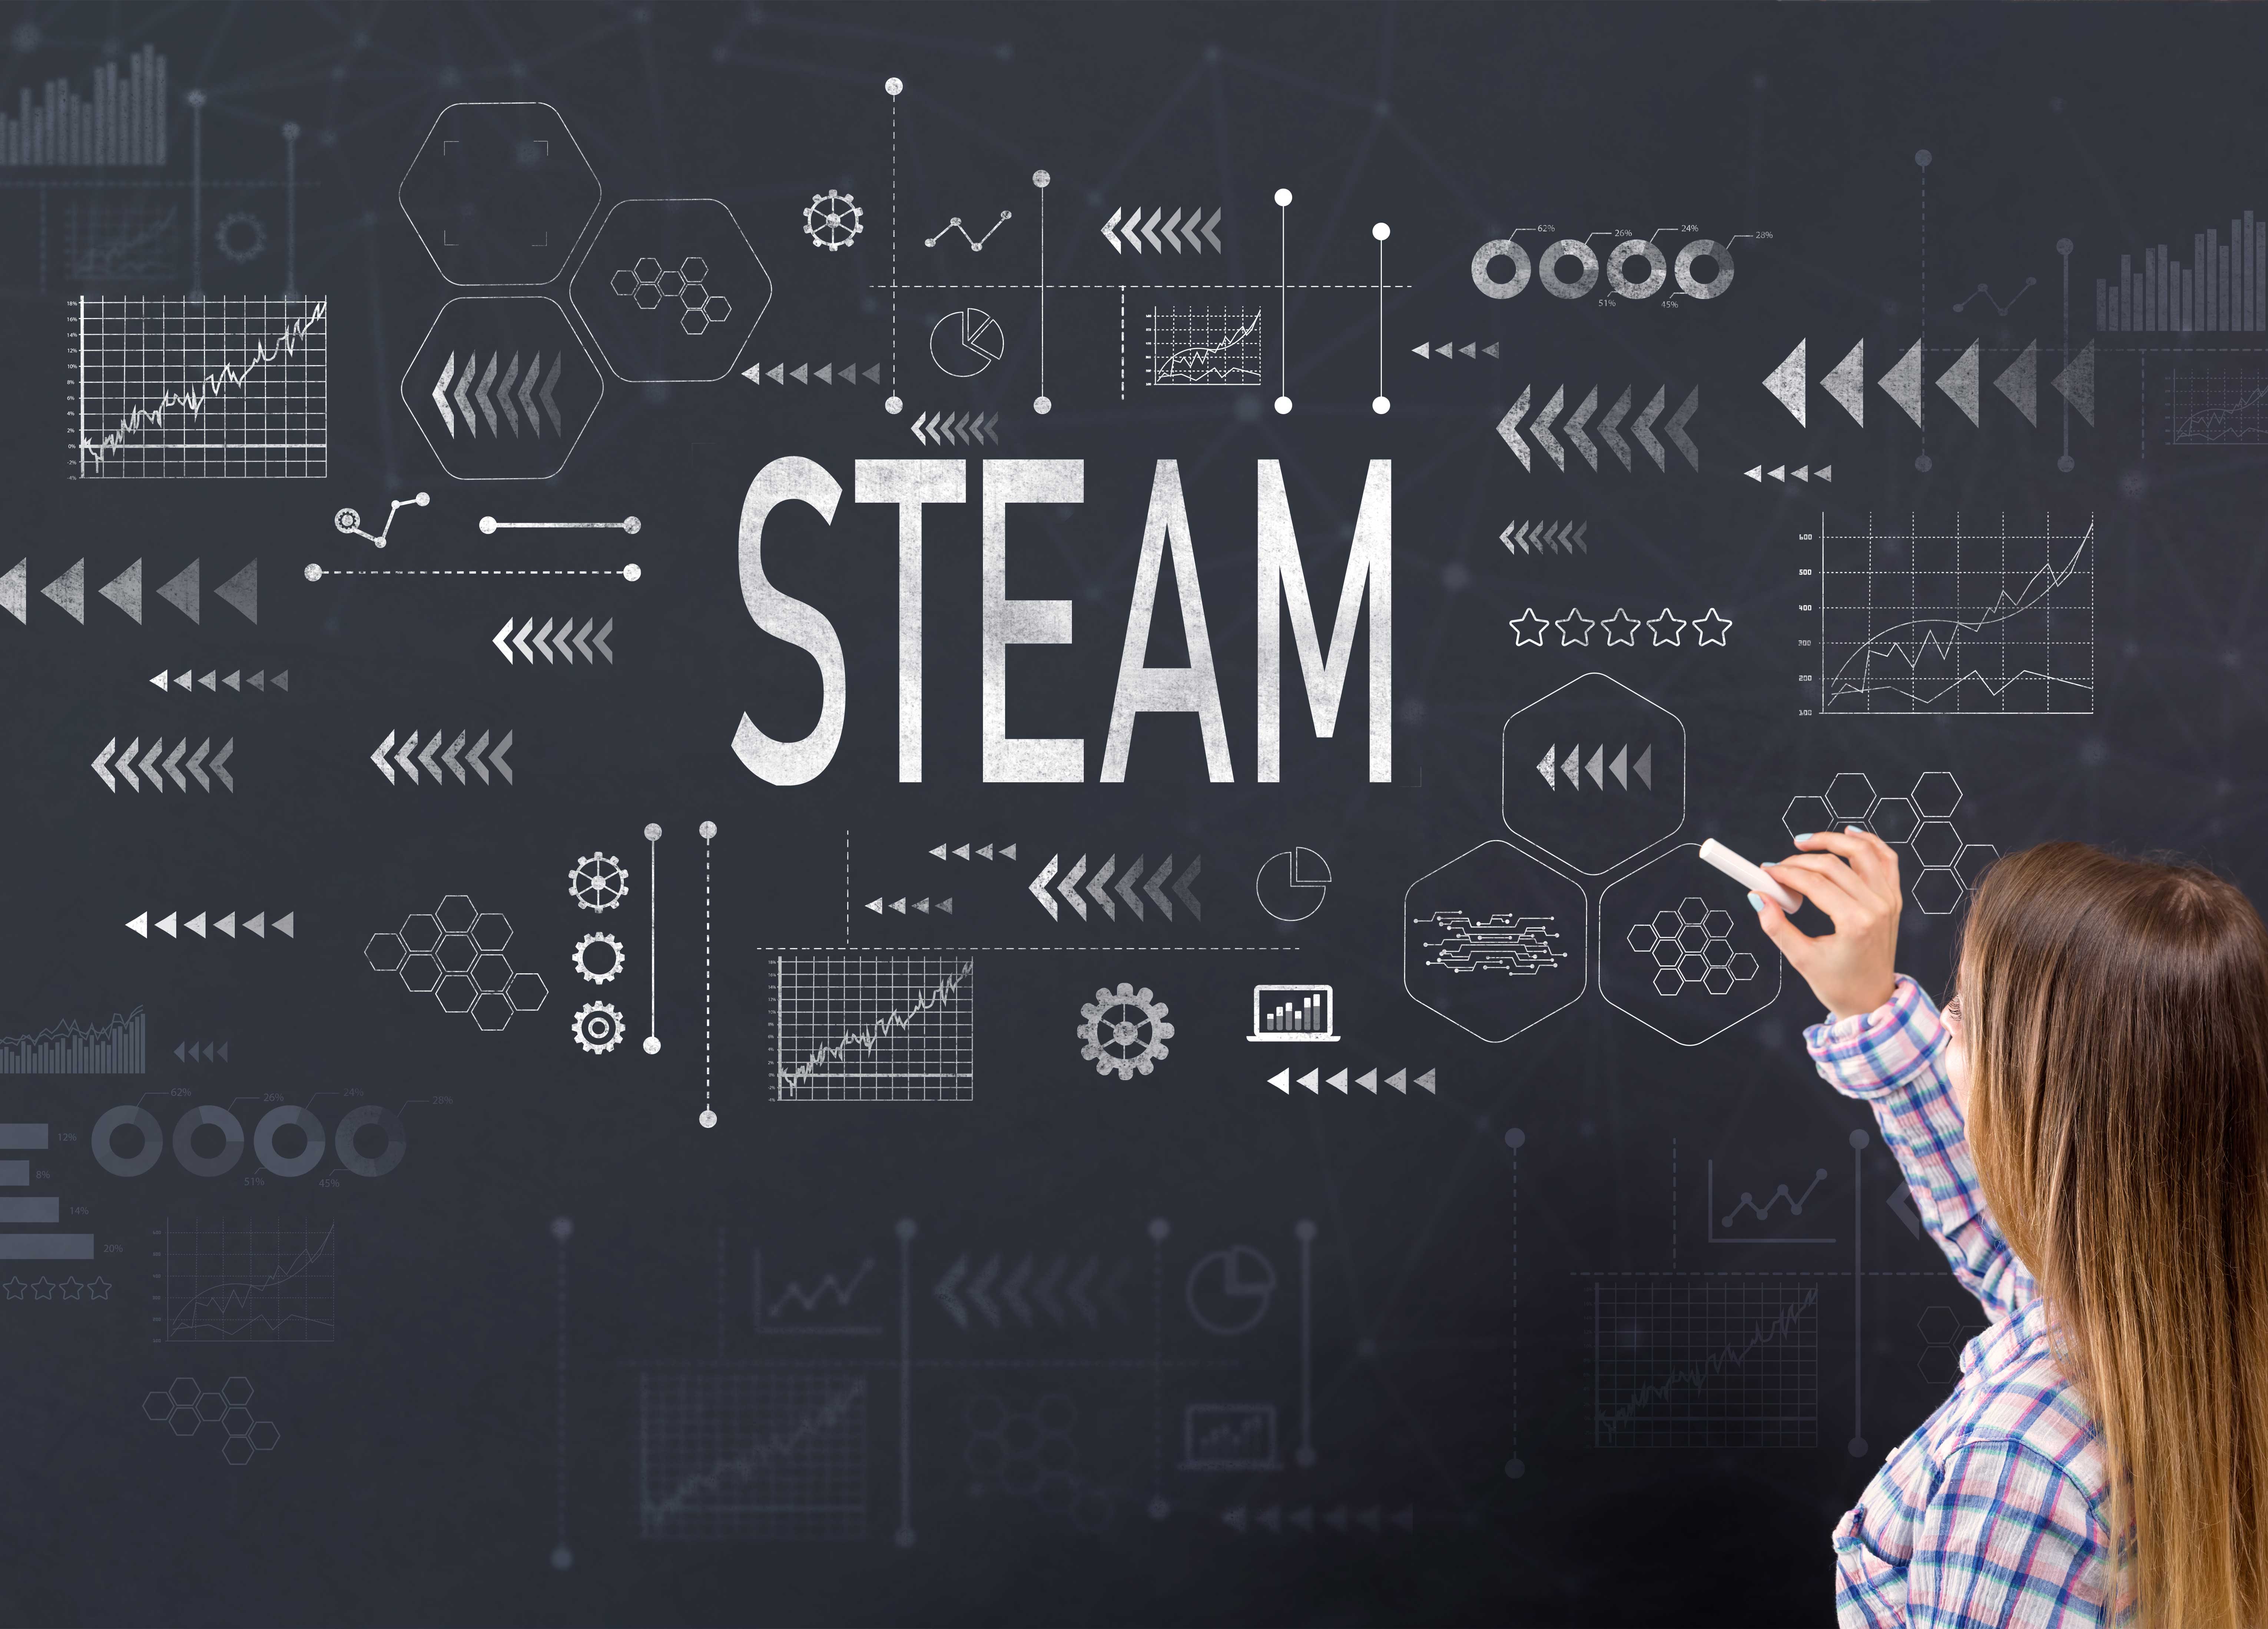 Education in the spirit of STEAM